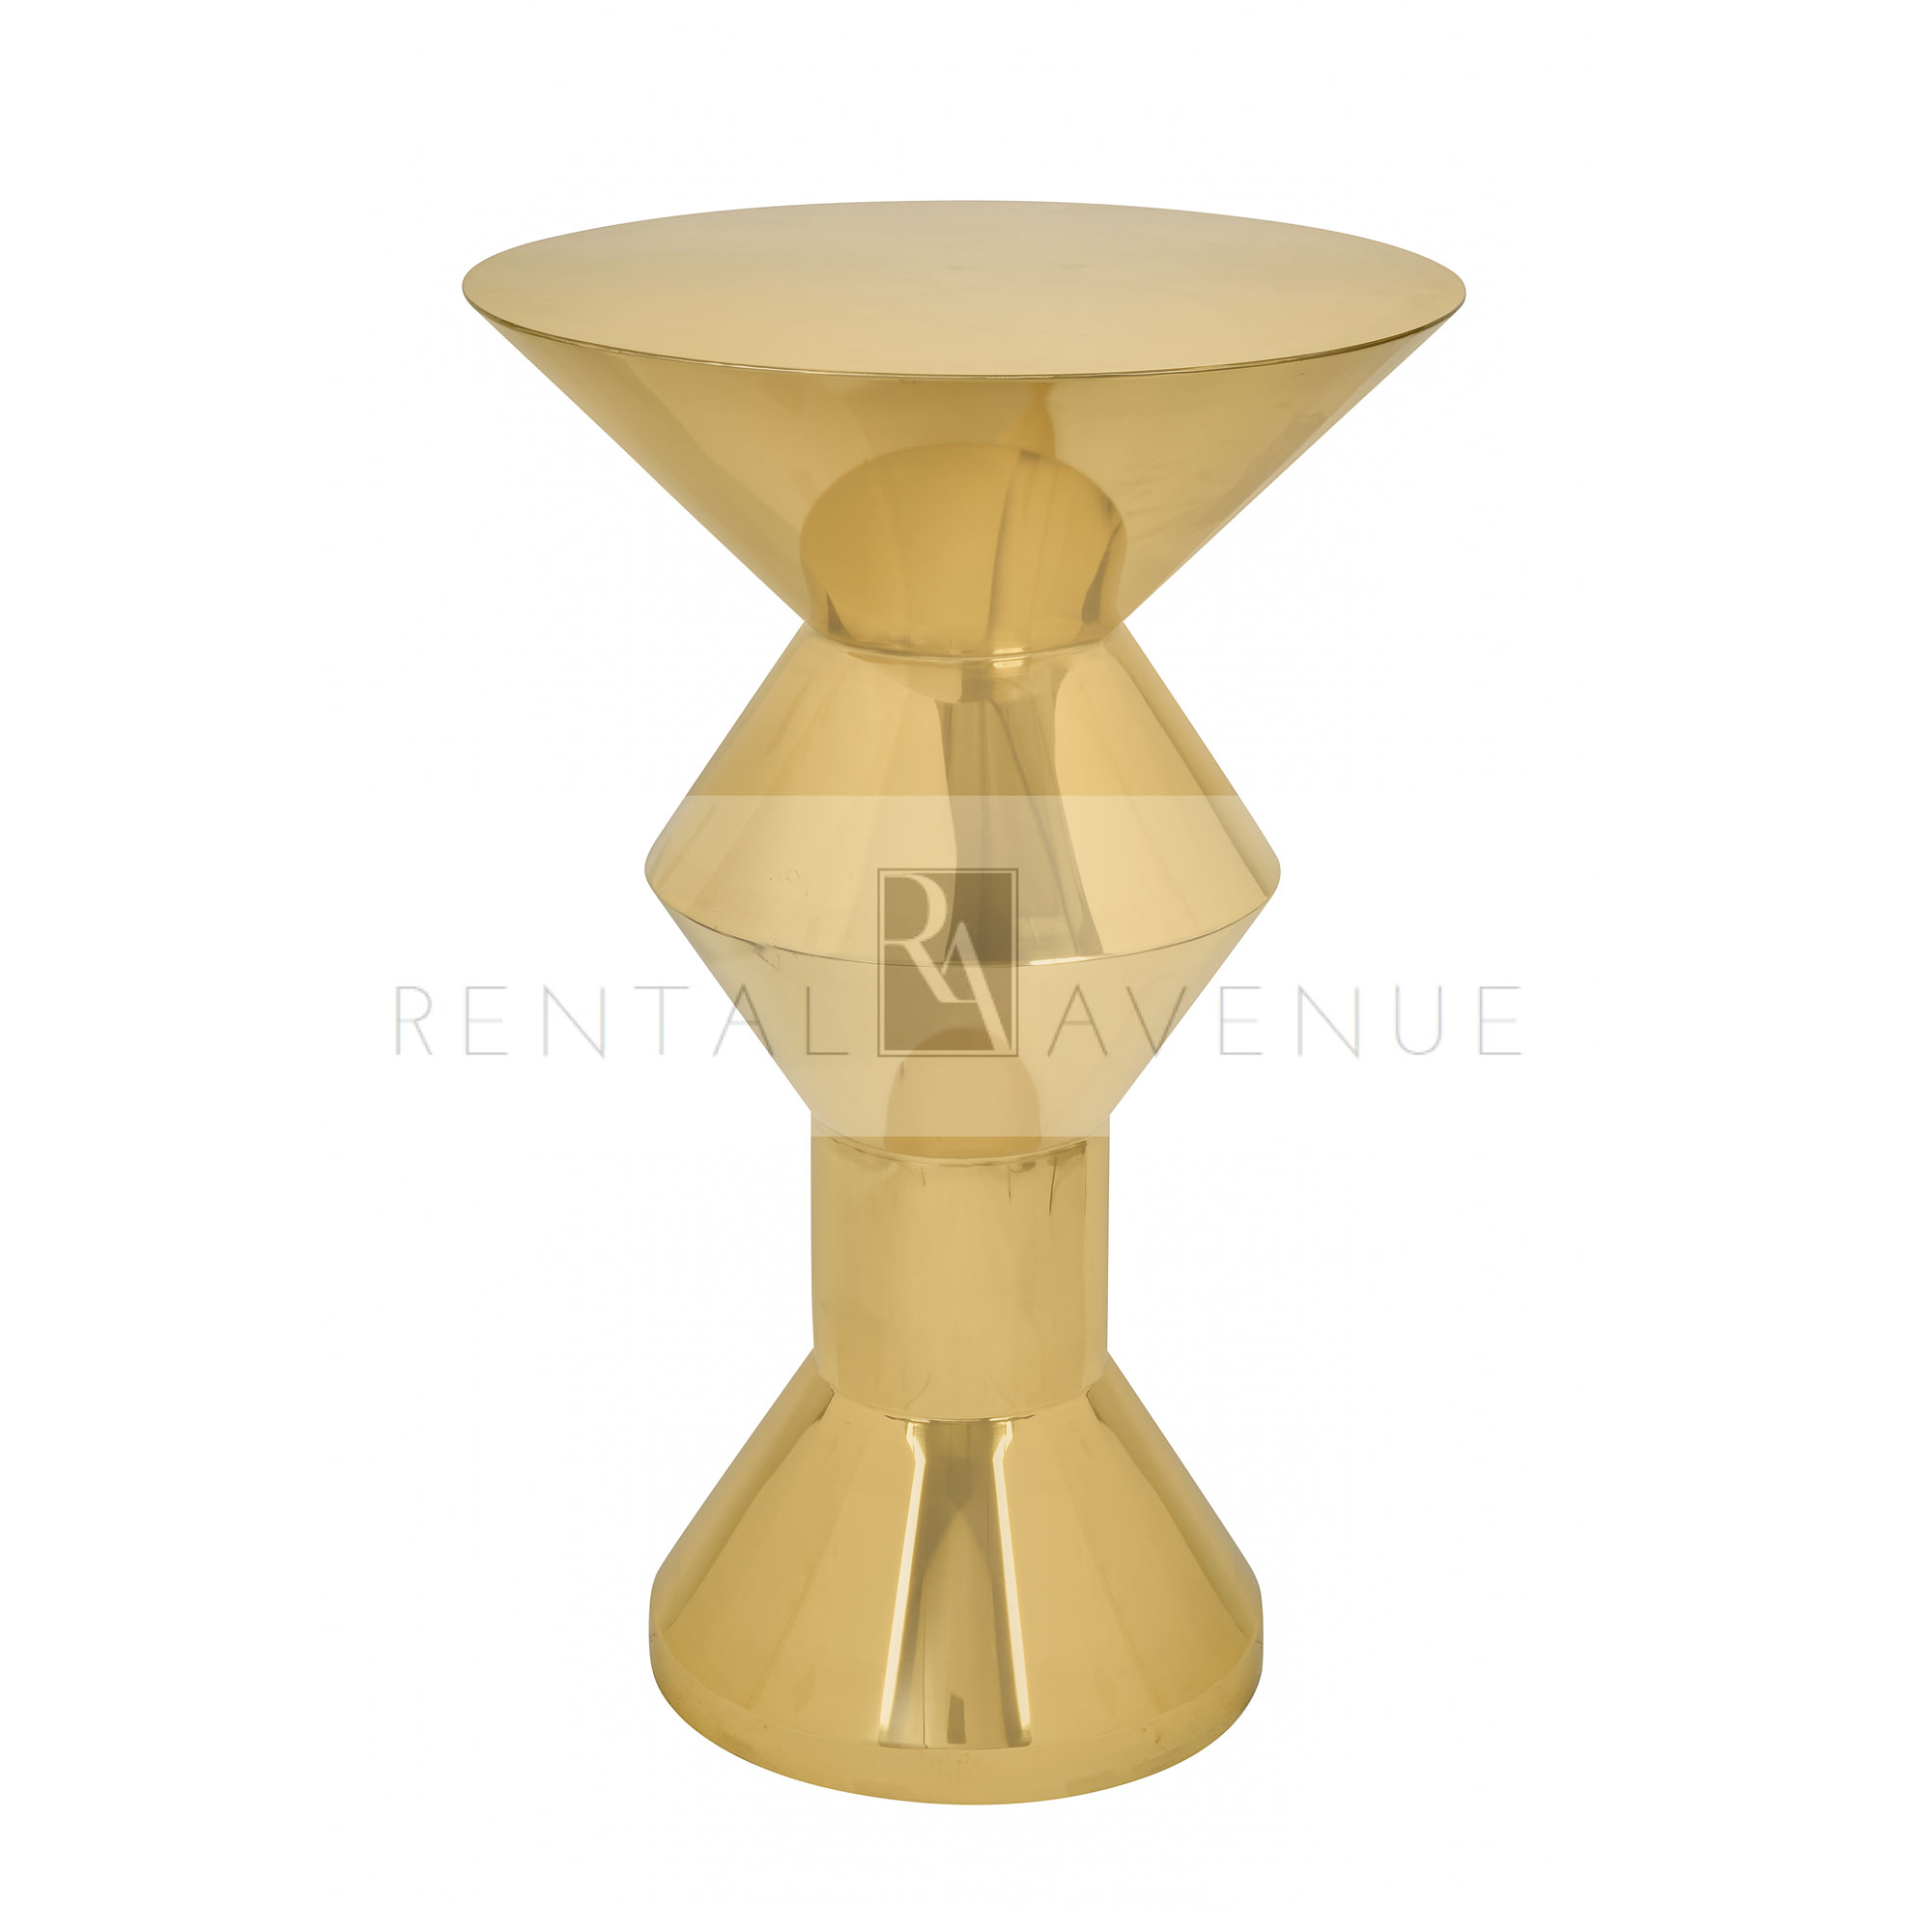 therentalave_category-st-honore-cocktail-table-XL-gold